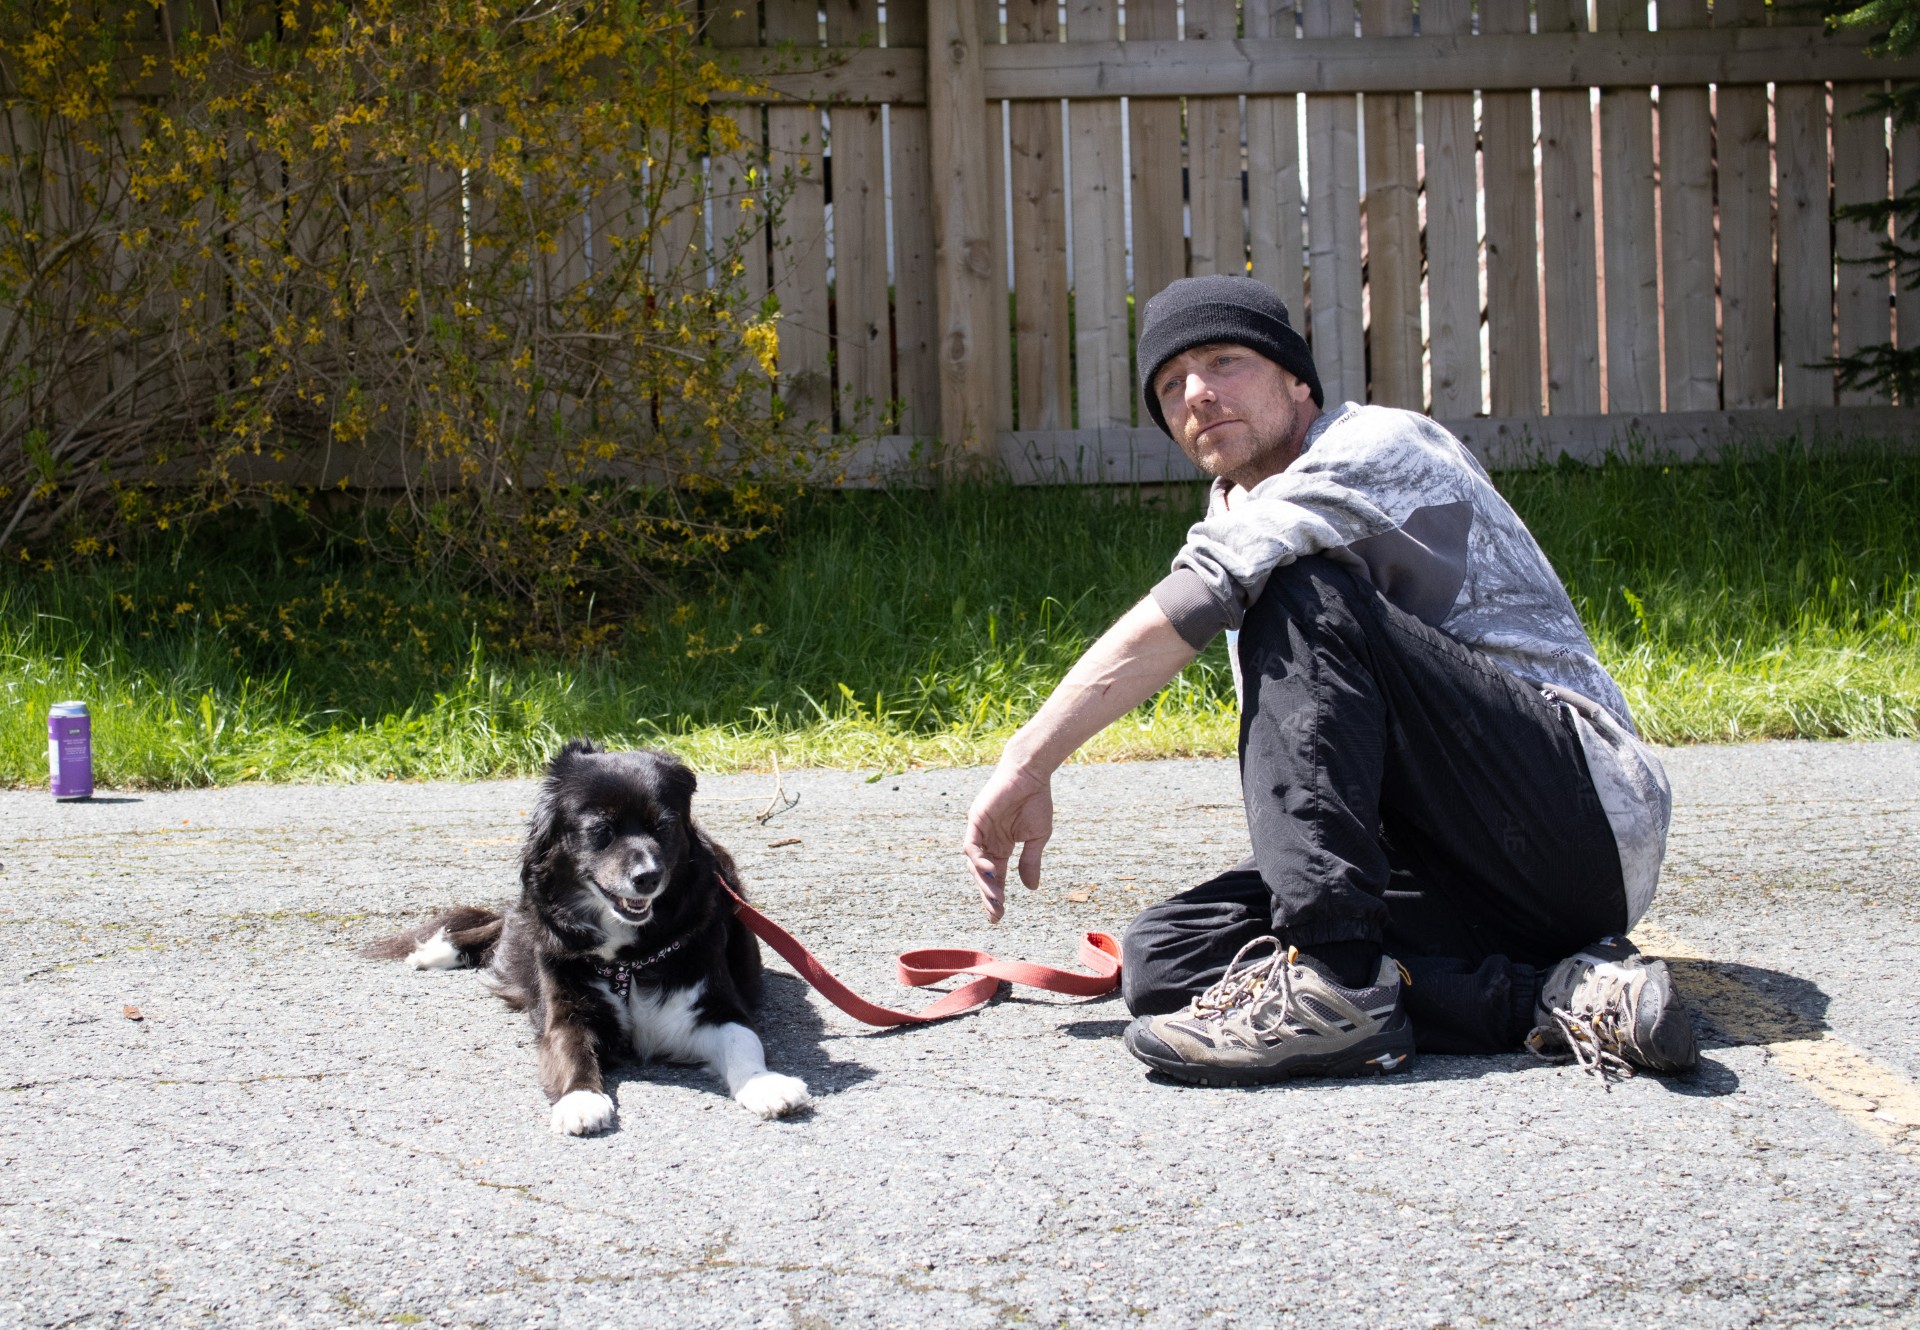 Gregory McCain and his dog Maggie sit on a parking lot outside a shelter. McCain was one of the protesters who occupied a homeless encampment on the Colonial Building property for several months.